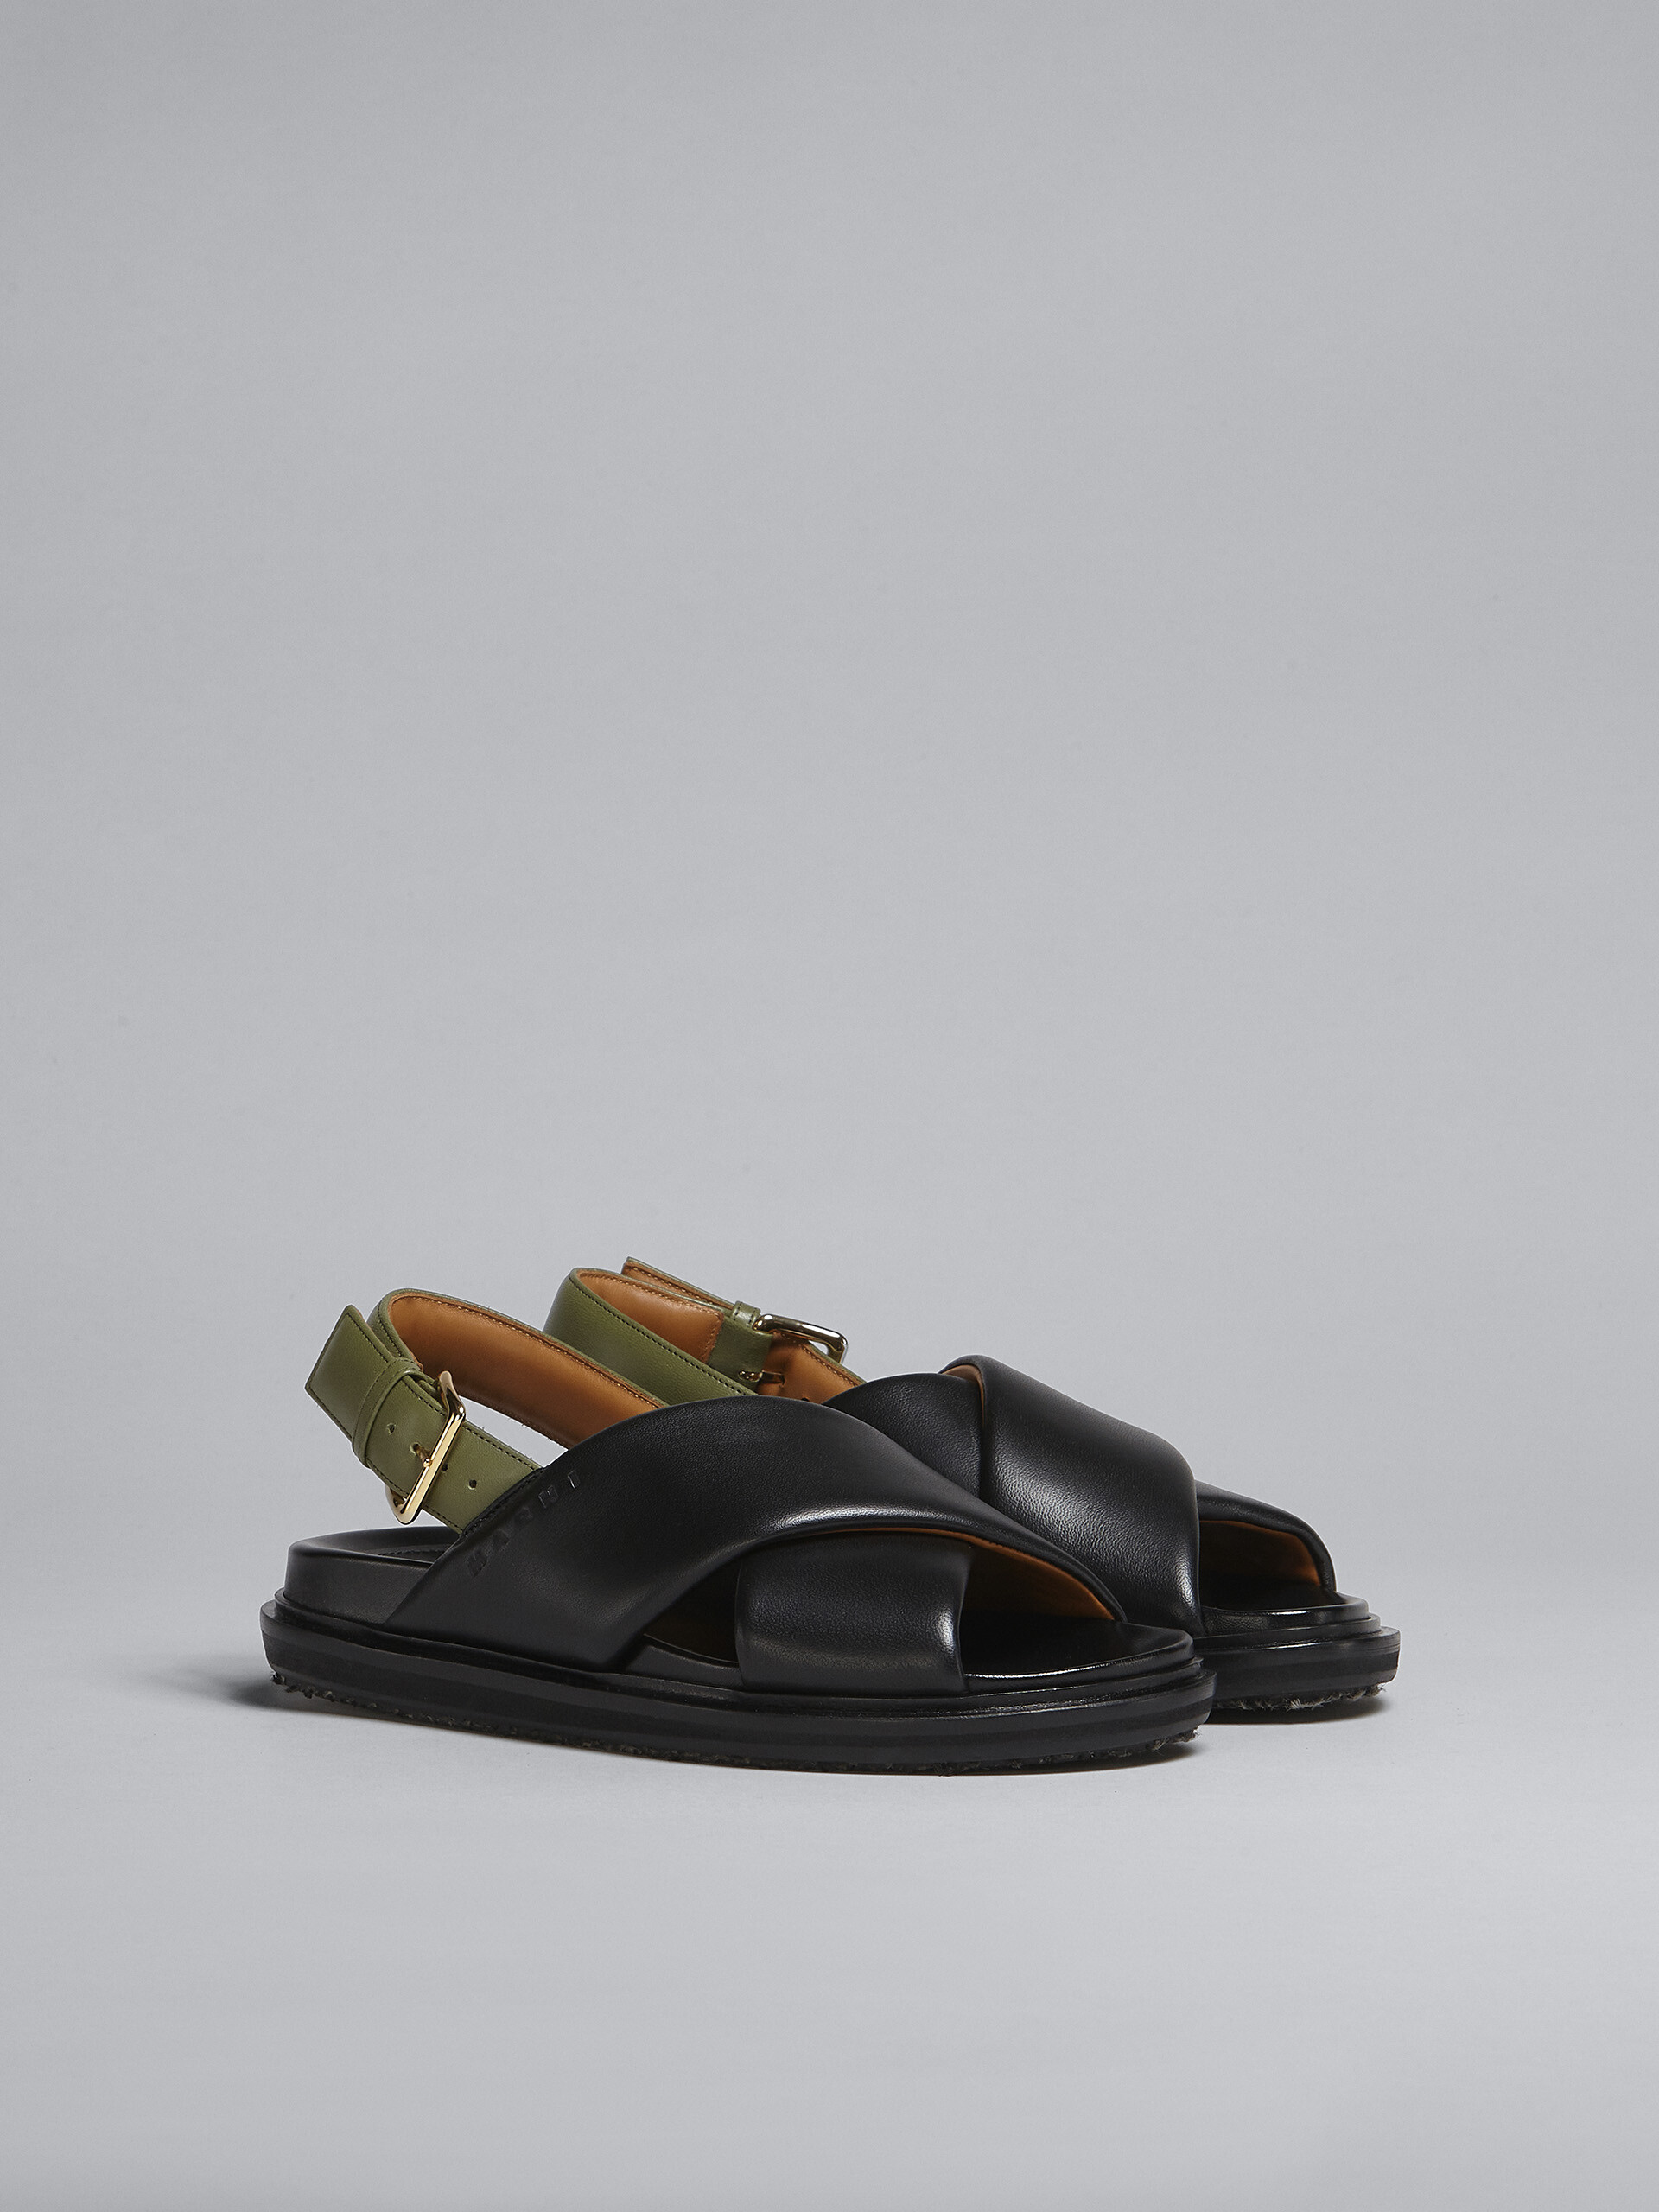 Black and green leather fussbett - Sandals - Image 2